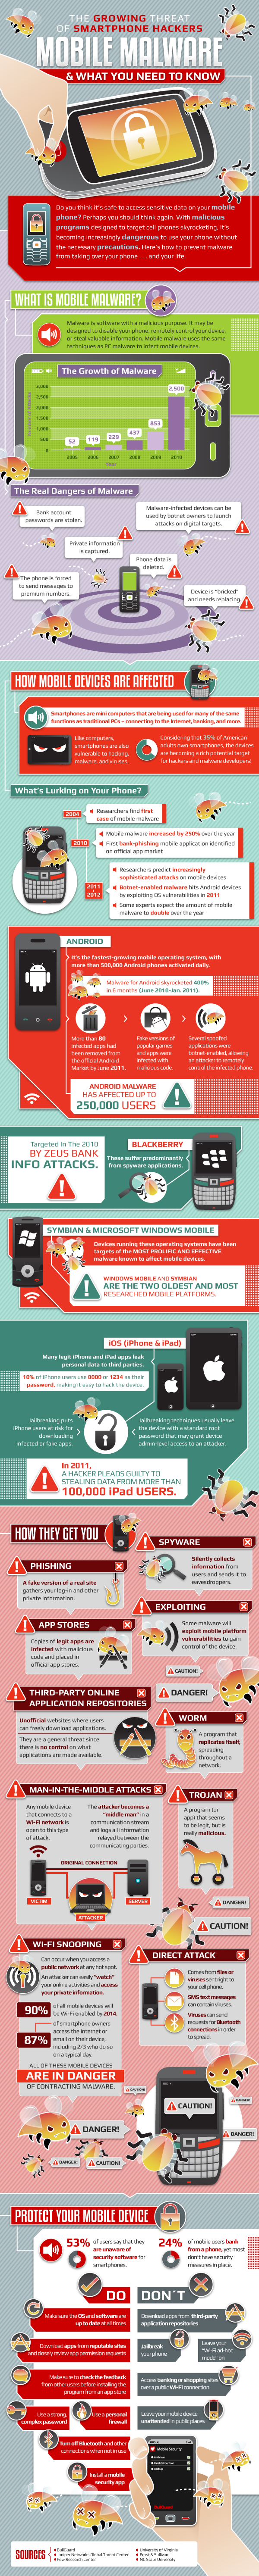 State of Mobile Malware Infographic State of Mobile Malware [infographic]